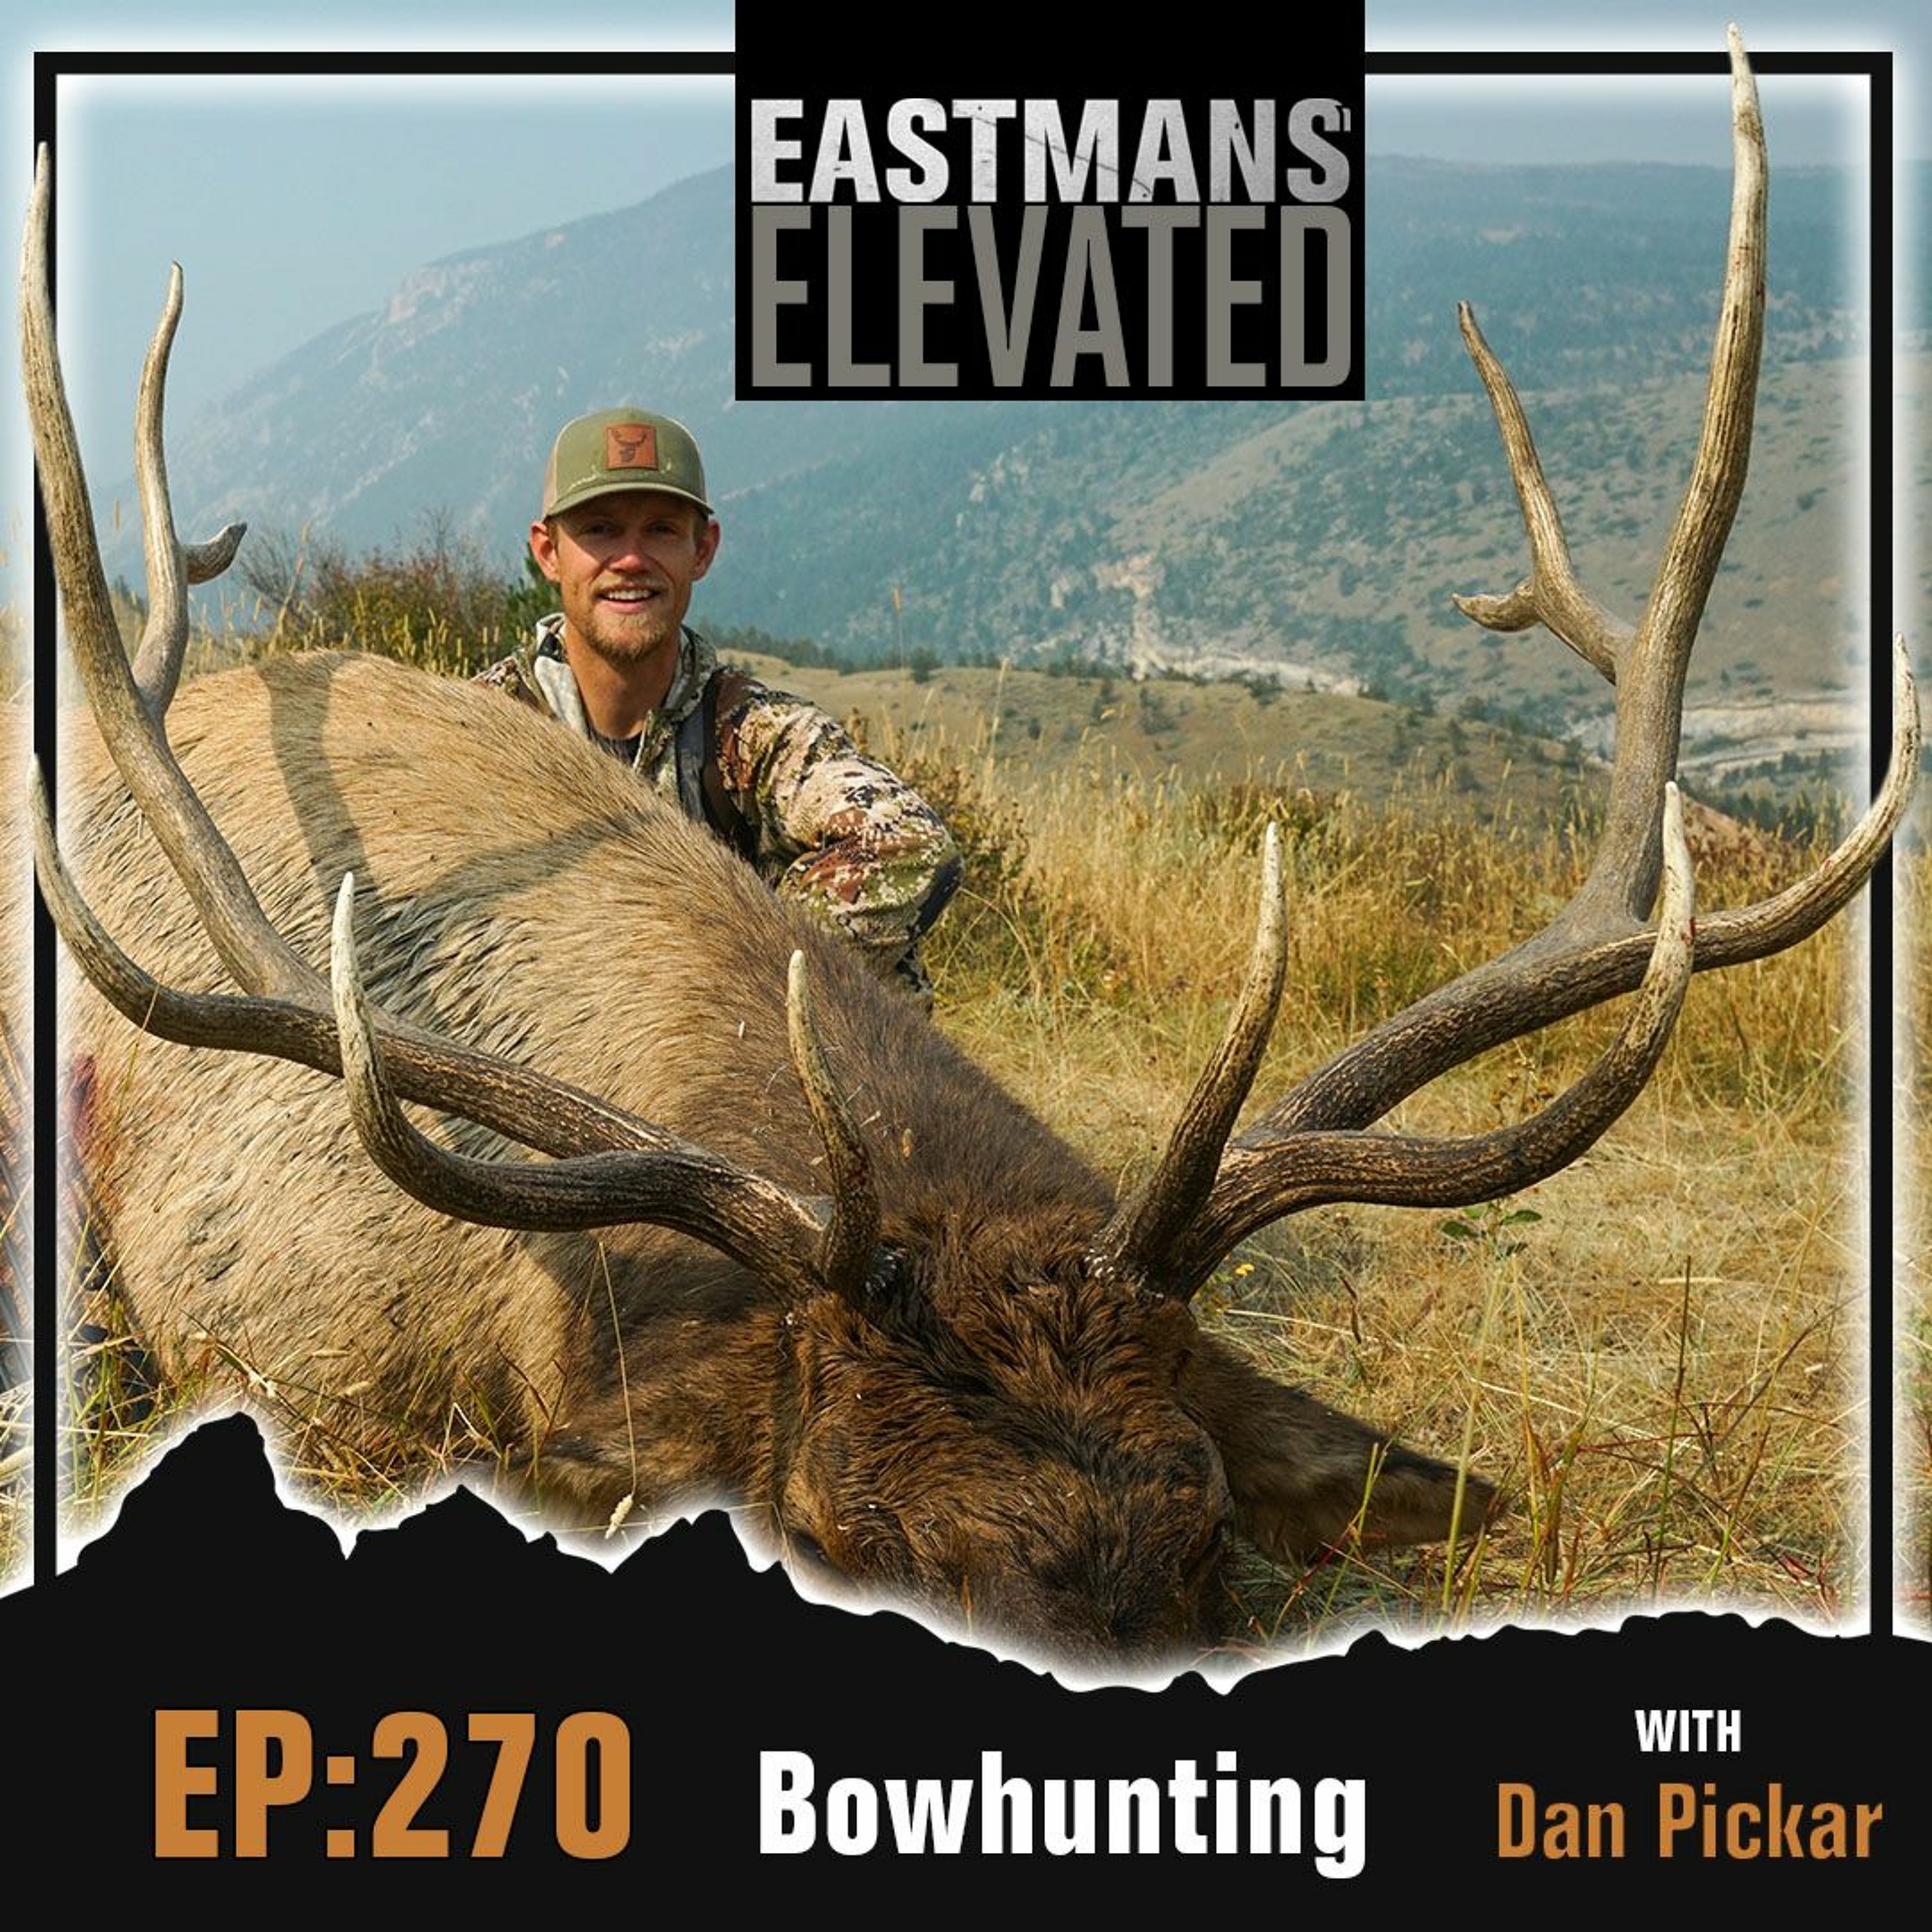 Episode 270: Bowhunting with Dan Pickar